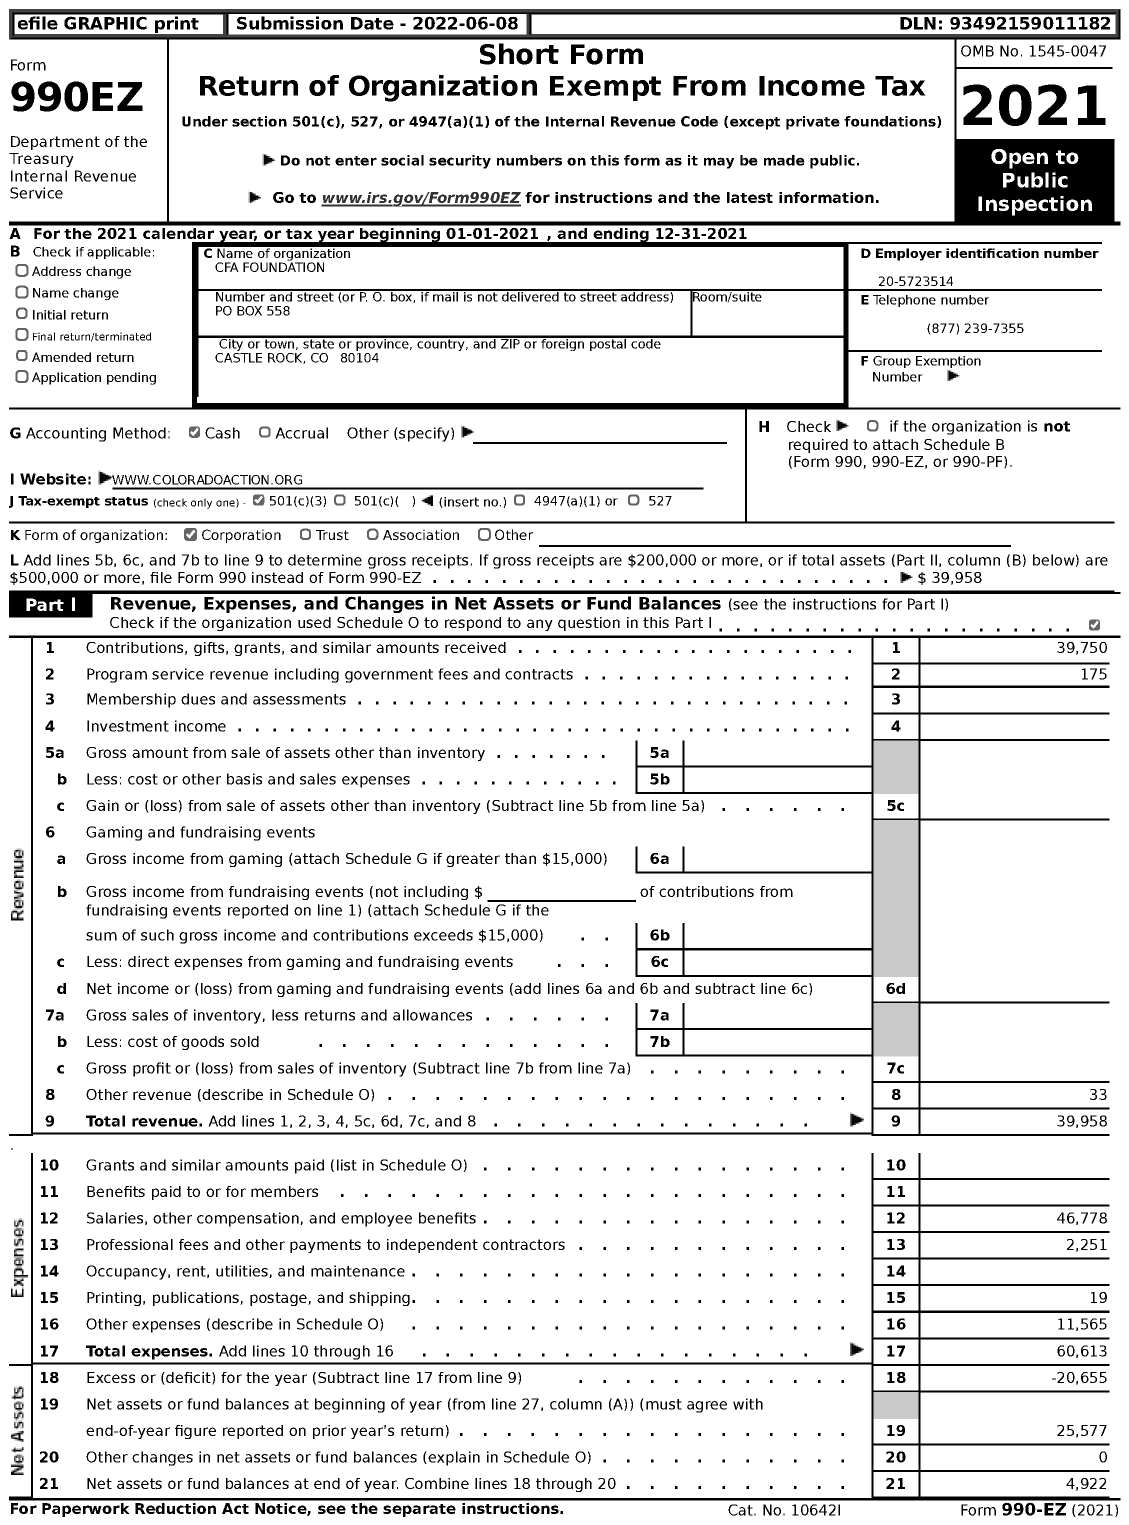 Image of first page of 2021 Form 990EZ for Cfa Foundation